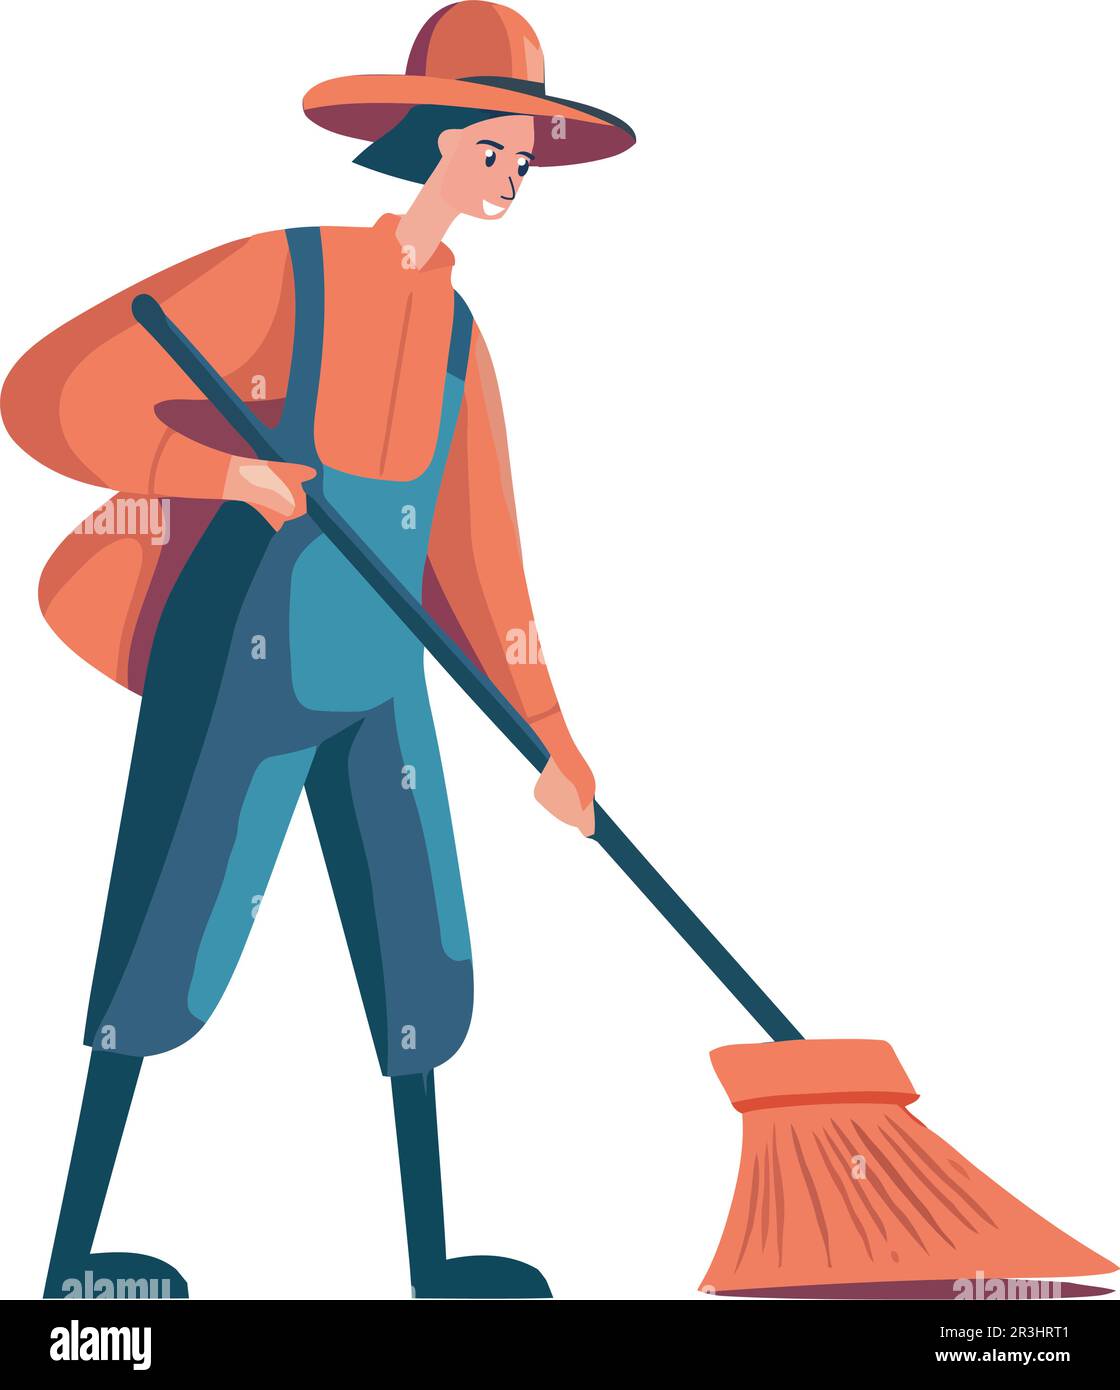 adult man holding a broom character Stock Vector